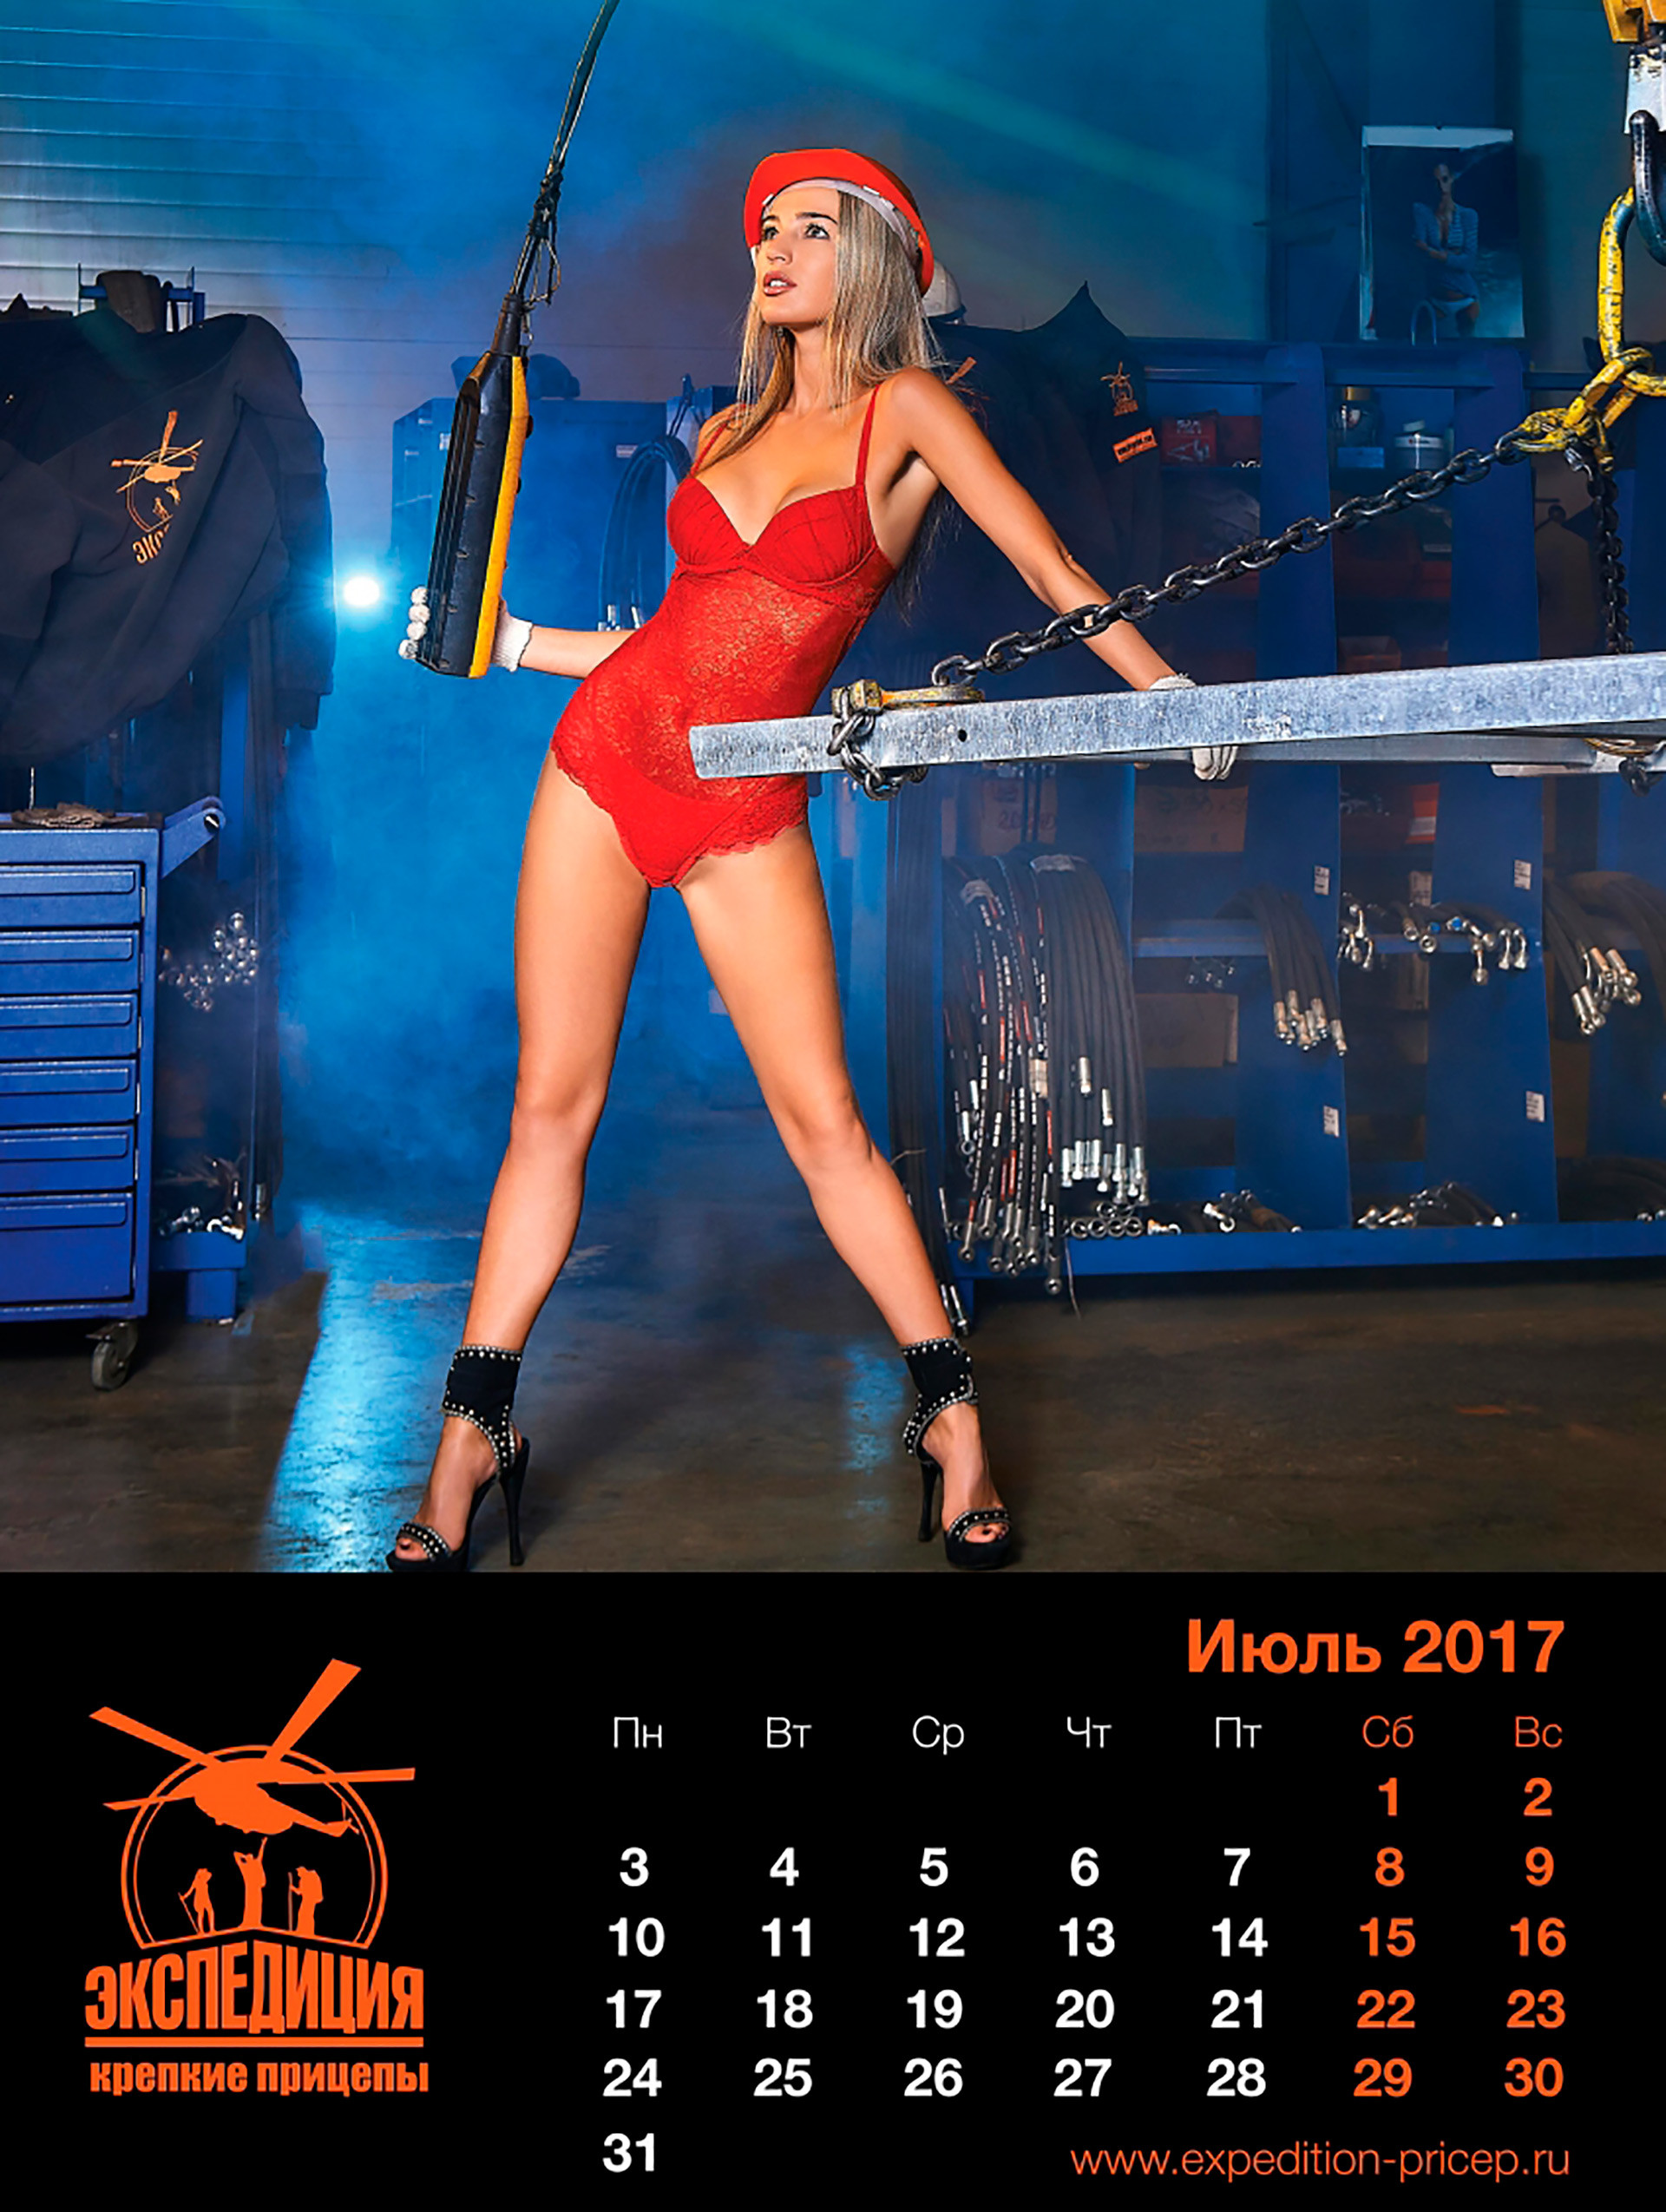 Naked girls on hevey equipment What Do Half Naked Girls And Men With Axes Have In Common They Re Russian Corporate Calendars Russia Beyond